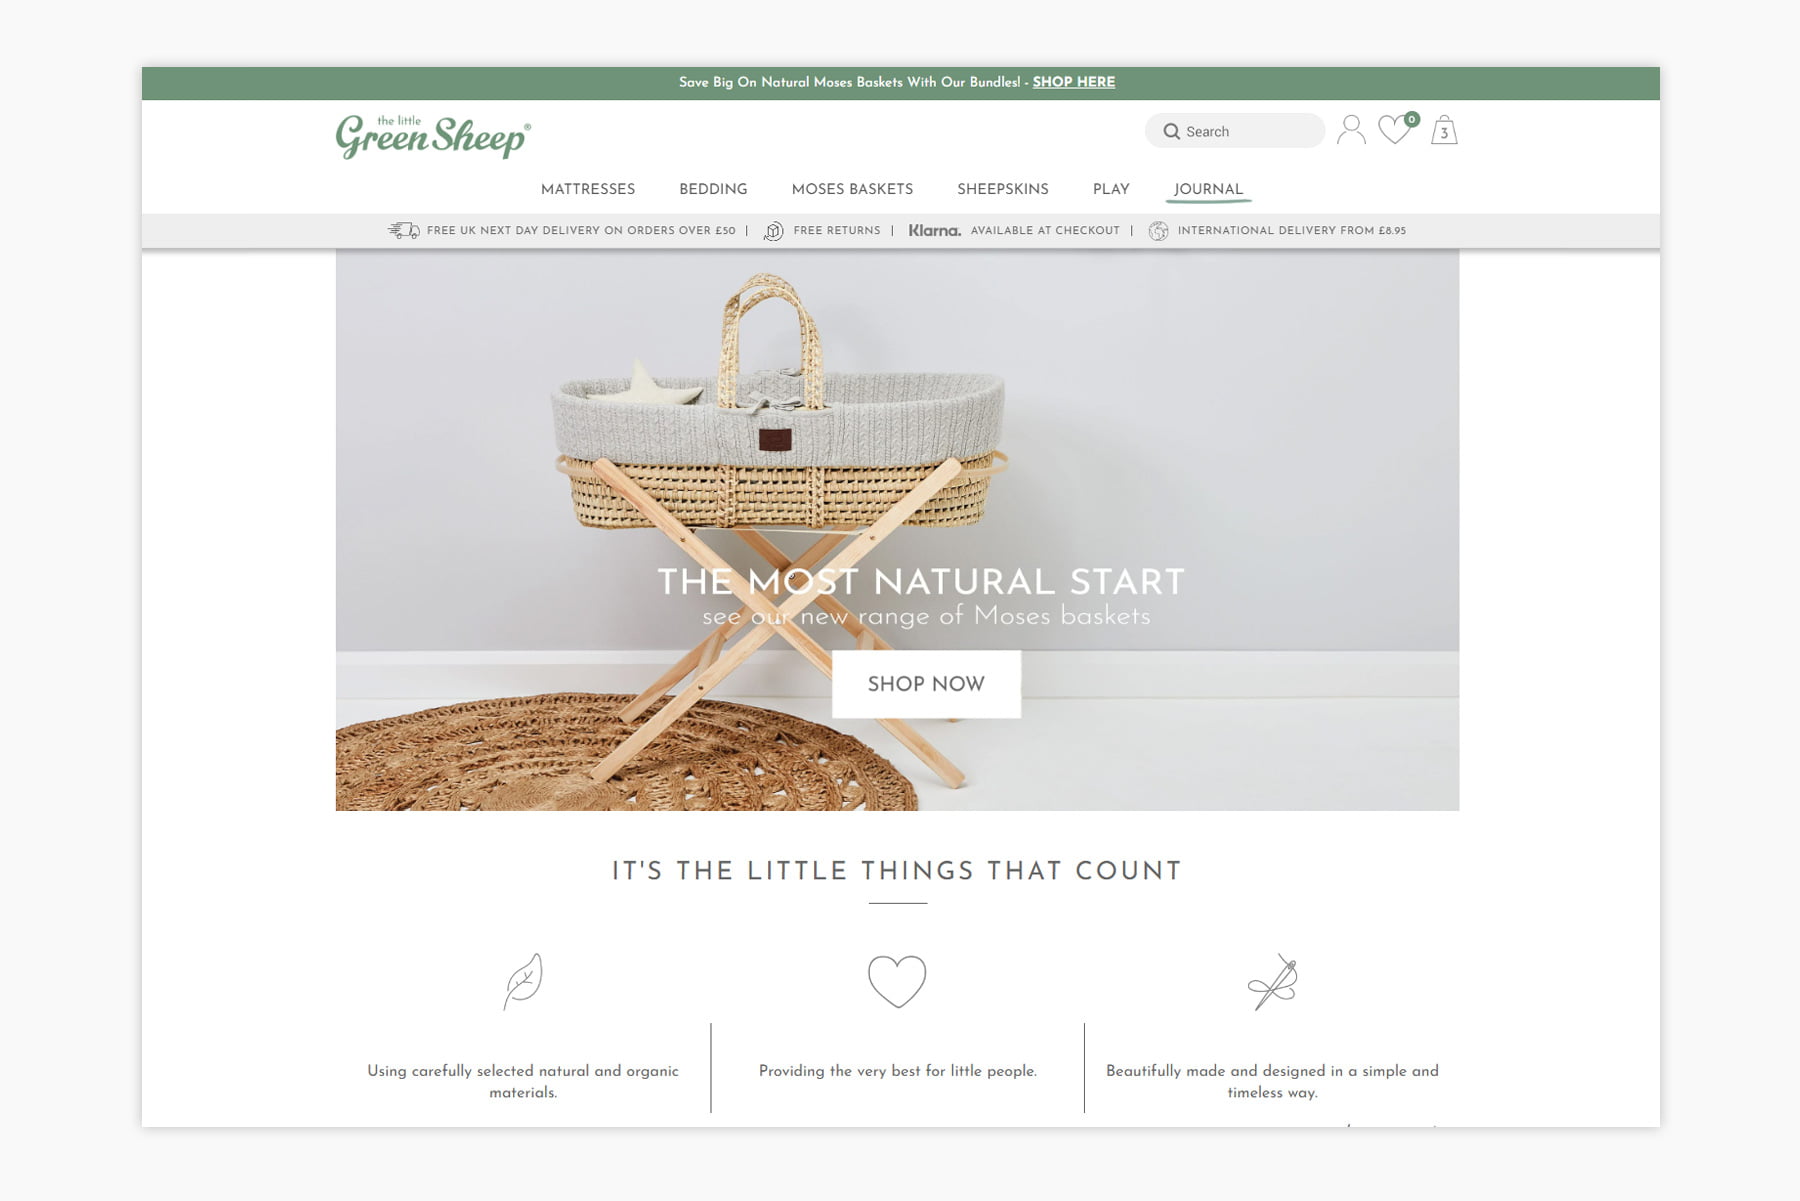 The Little Green Sheep Homepage